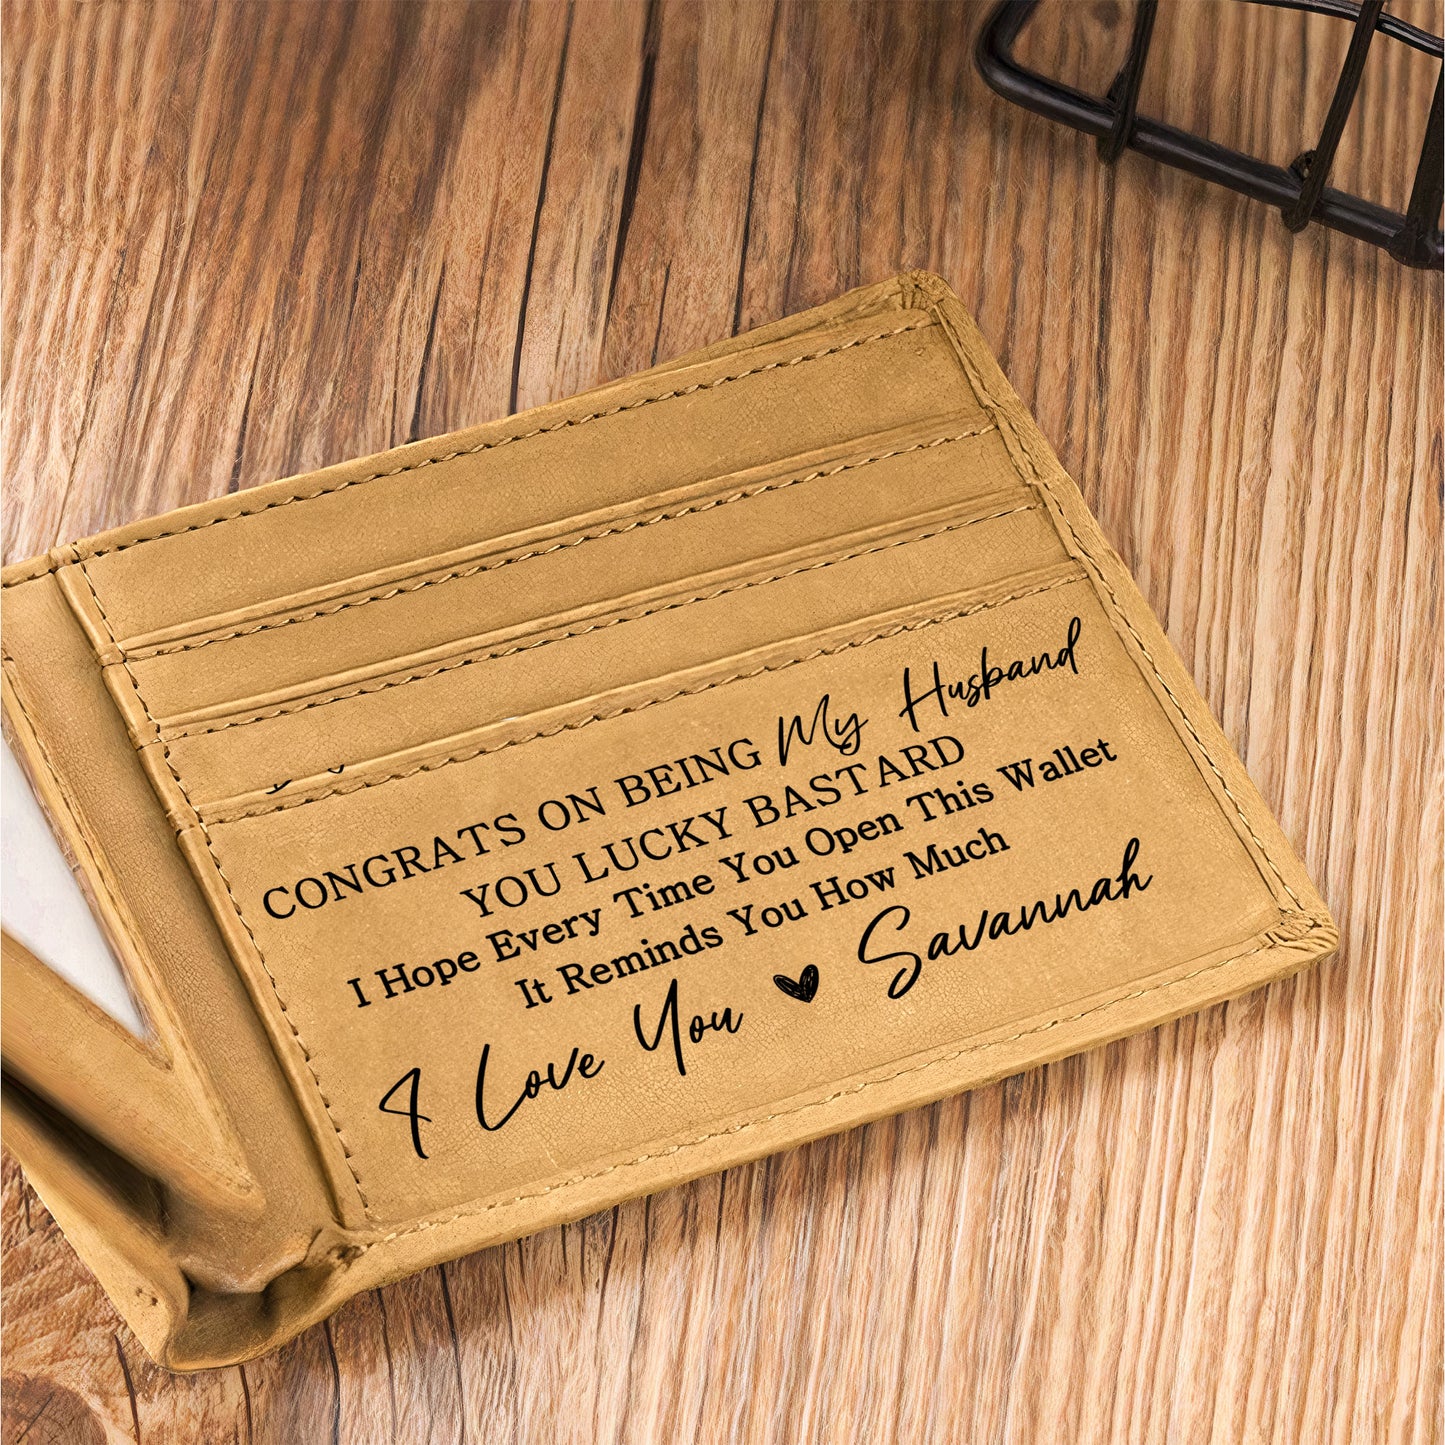 Congrats On Being My Husband - Personalized Leather Wallet